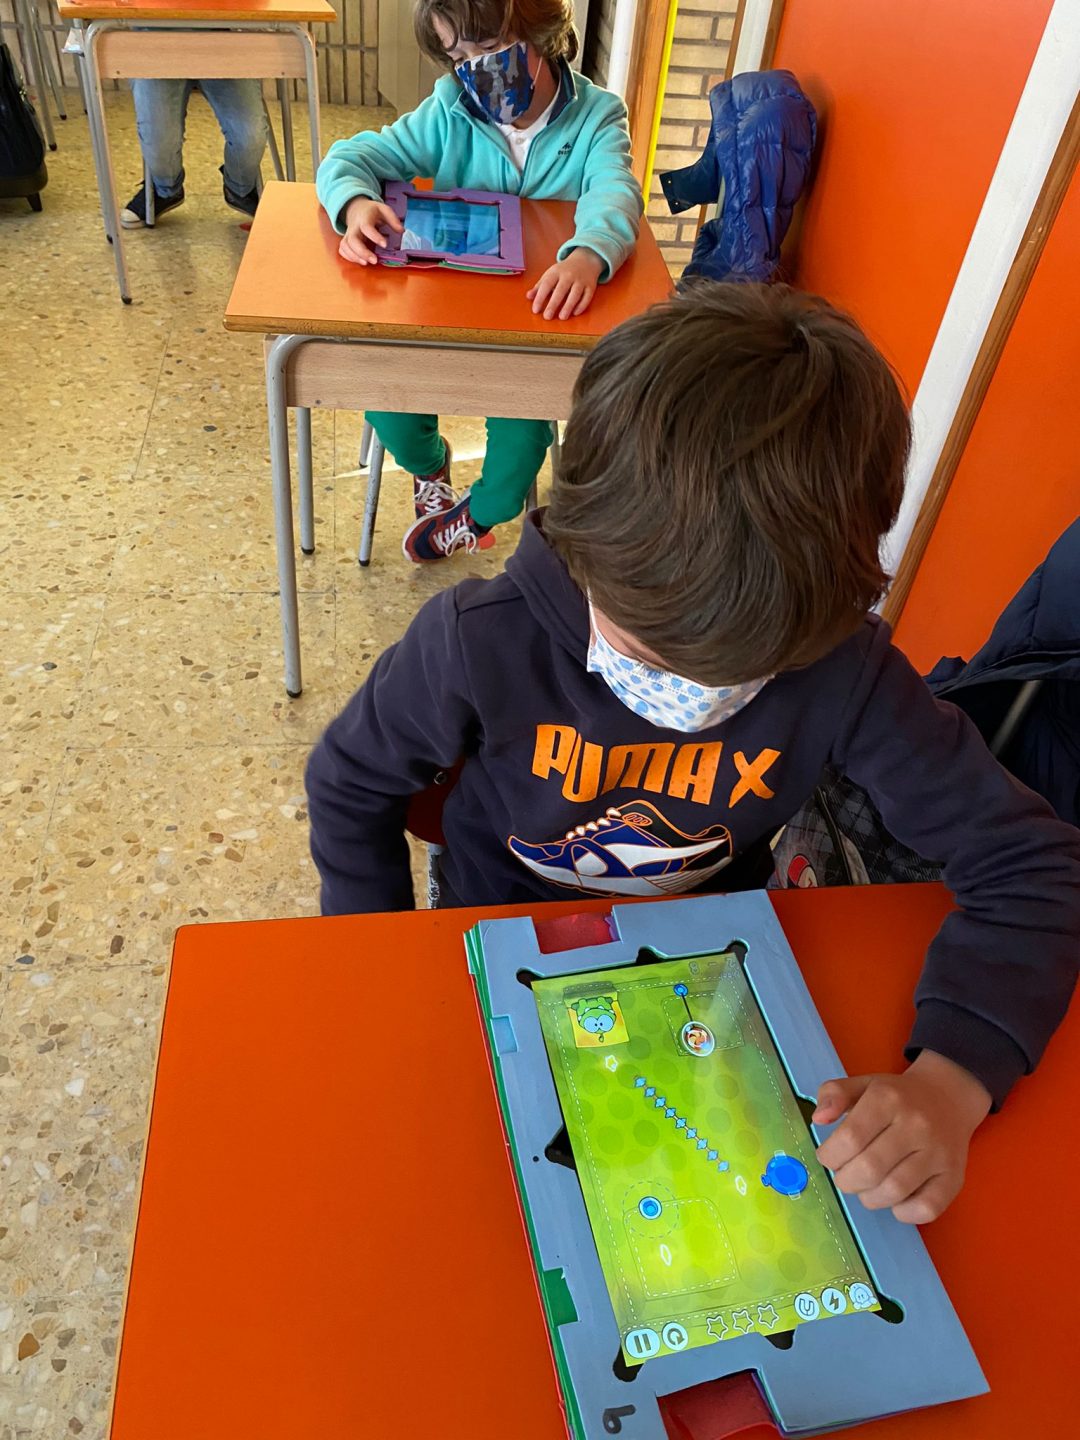 Protegido: Technology 2º de Primaria: Cut the rope, and you will see…